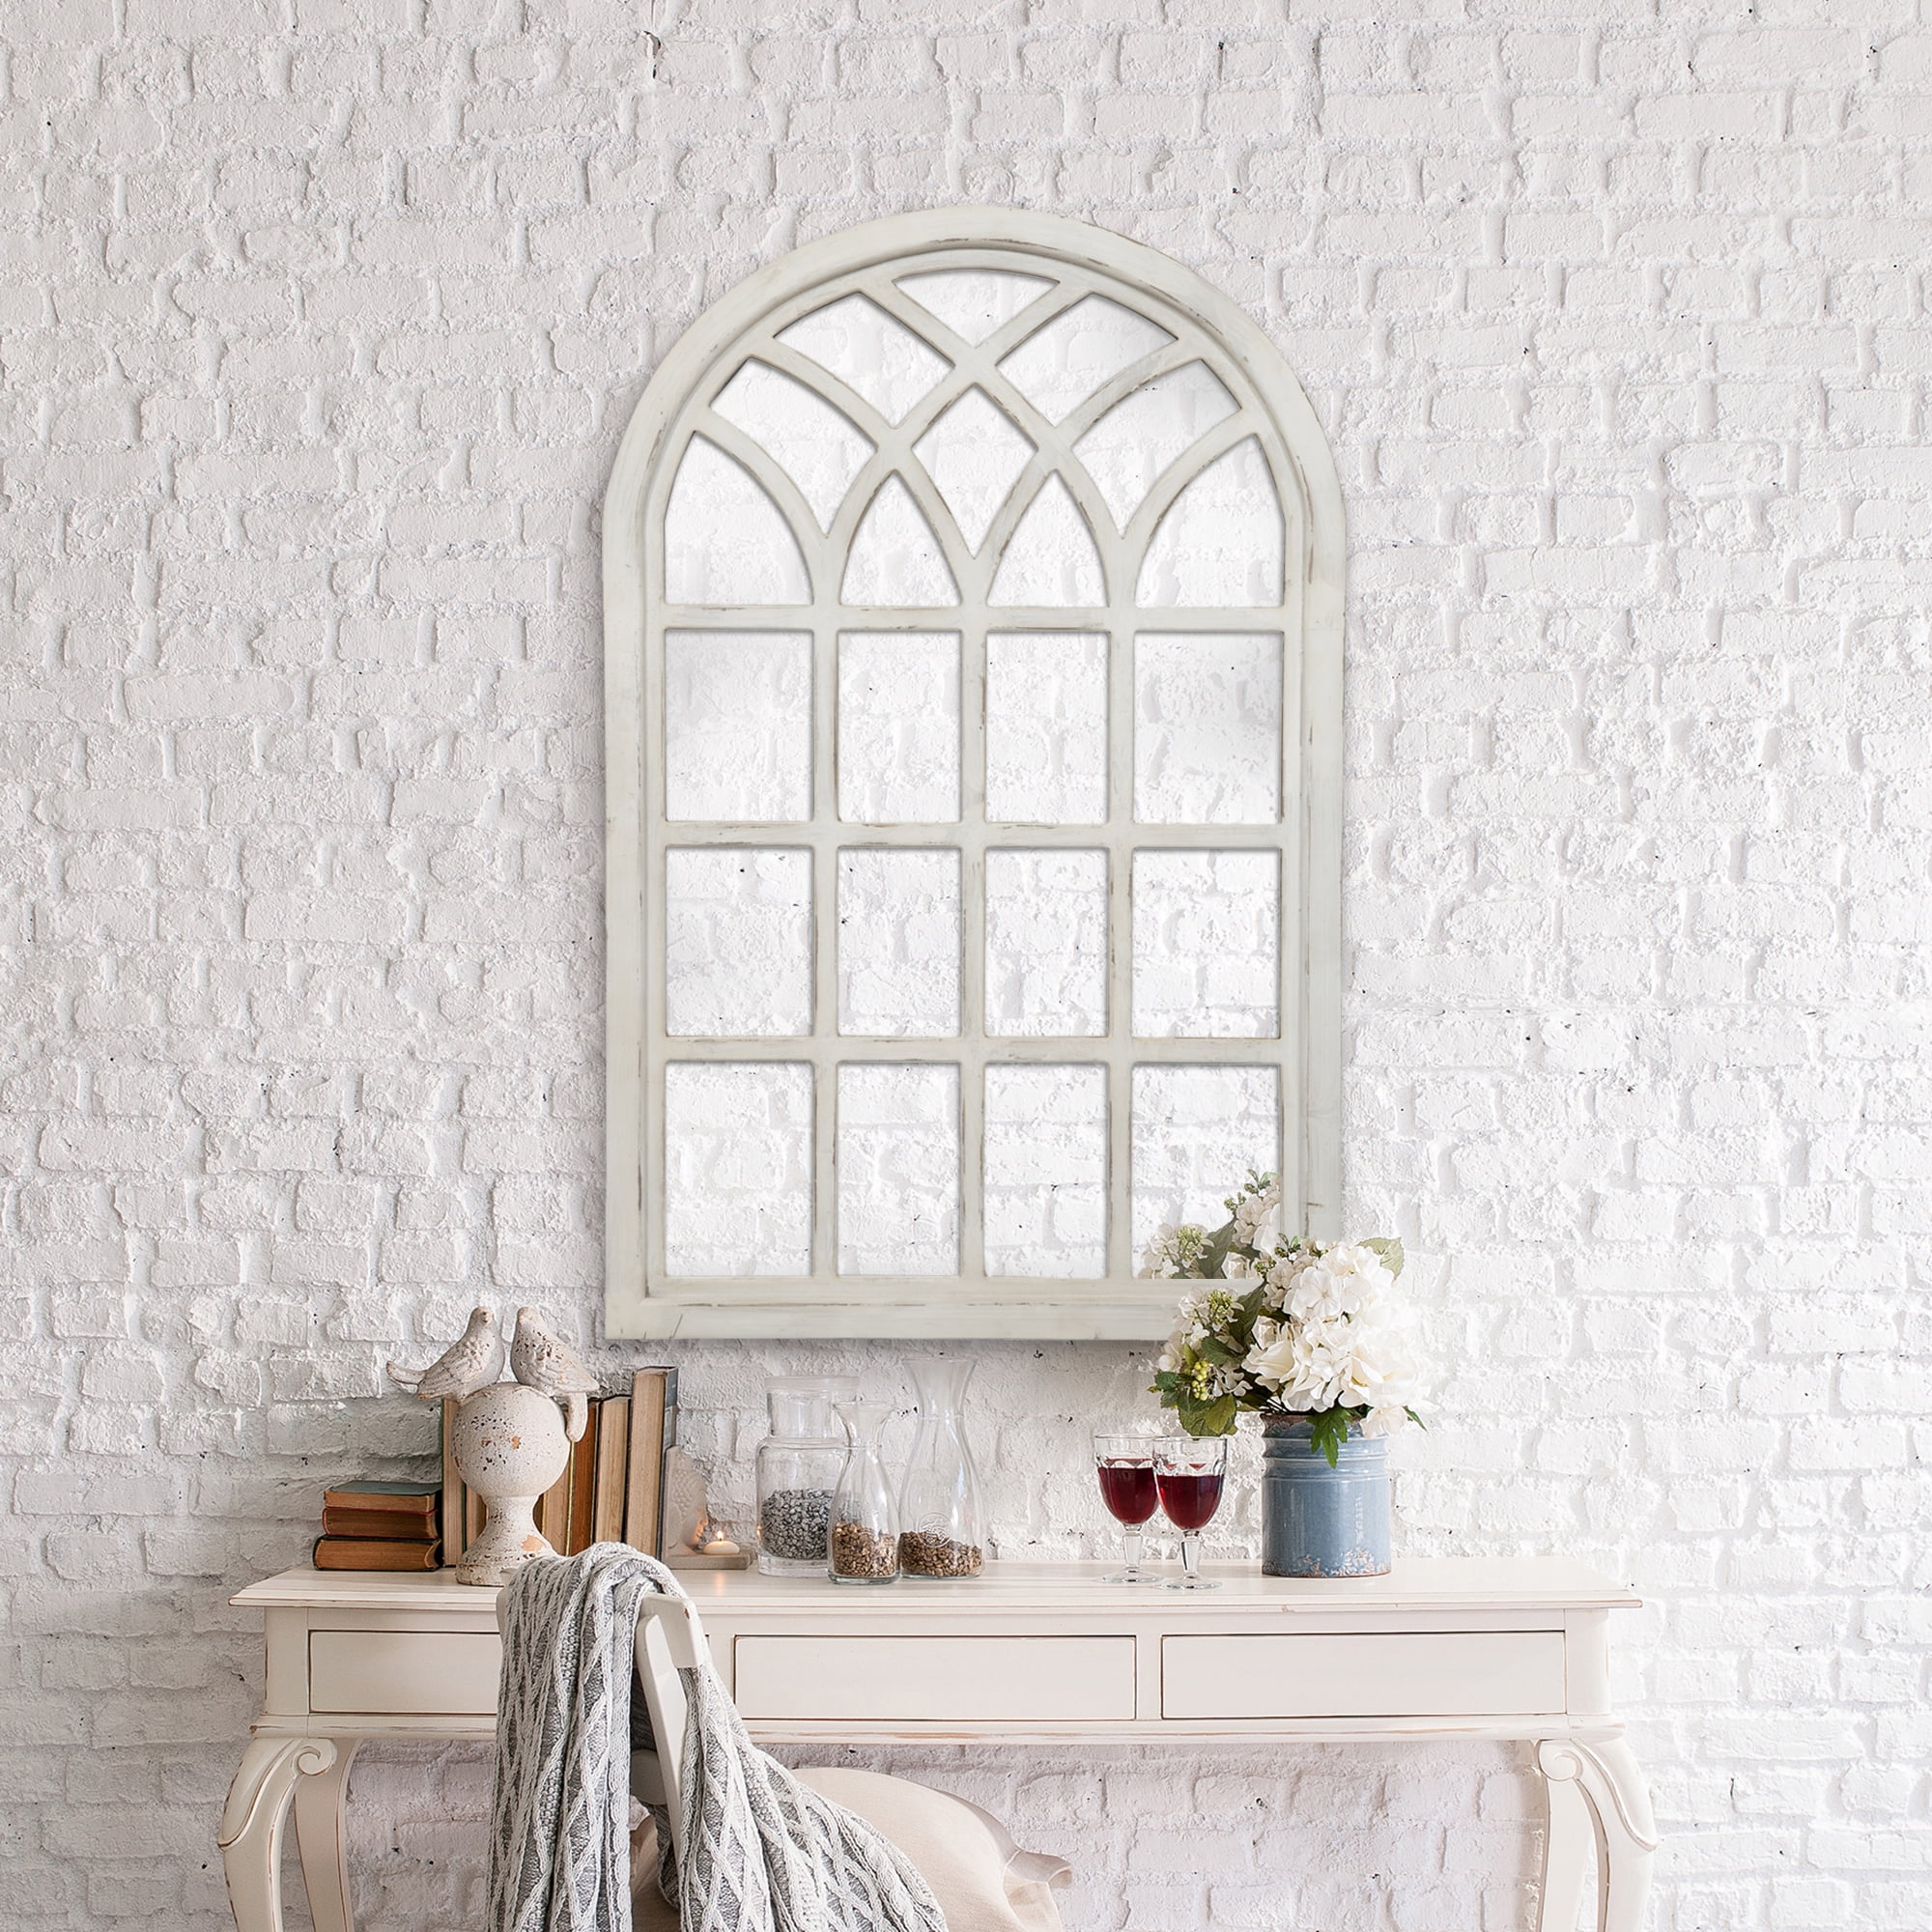 Gallery Solutions Farmhouse Cathedral Windowpane Wall Mirror in Antique